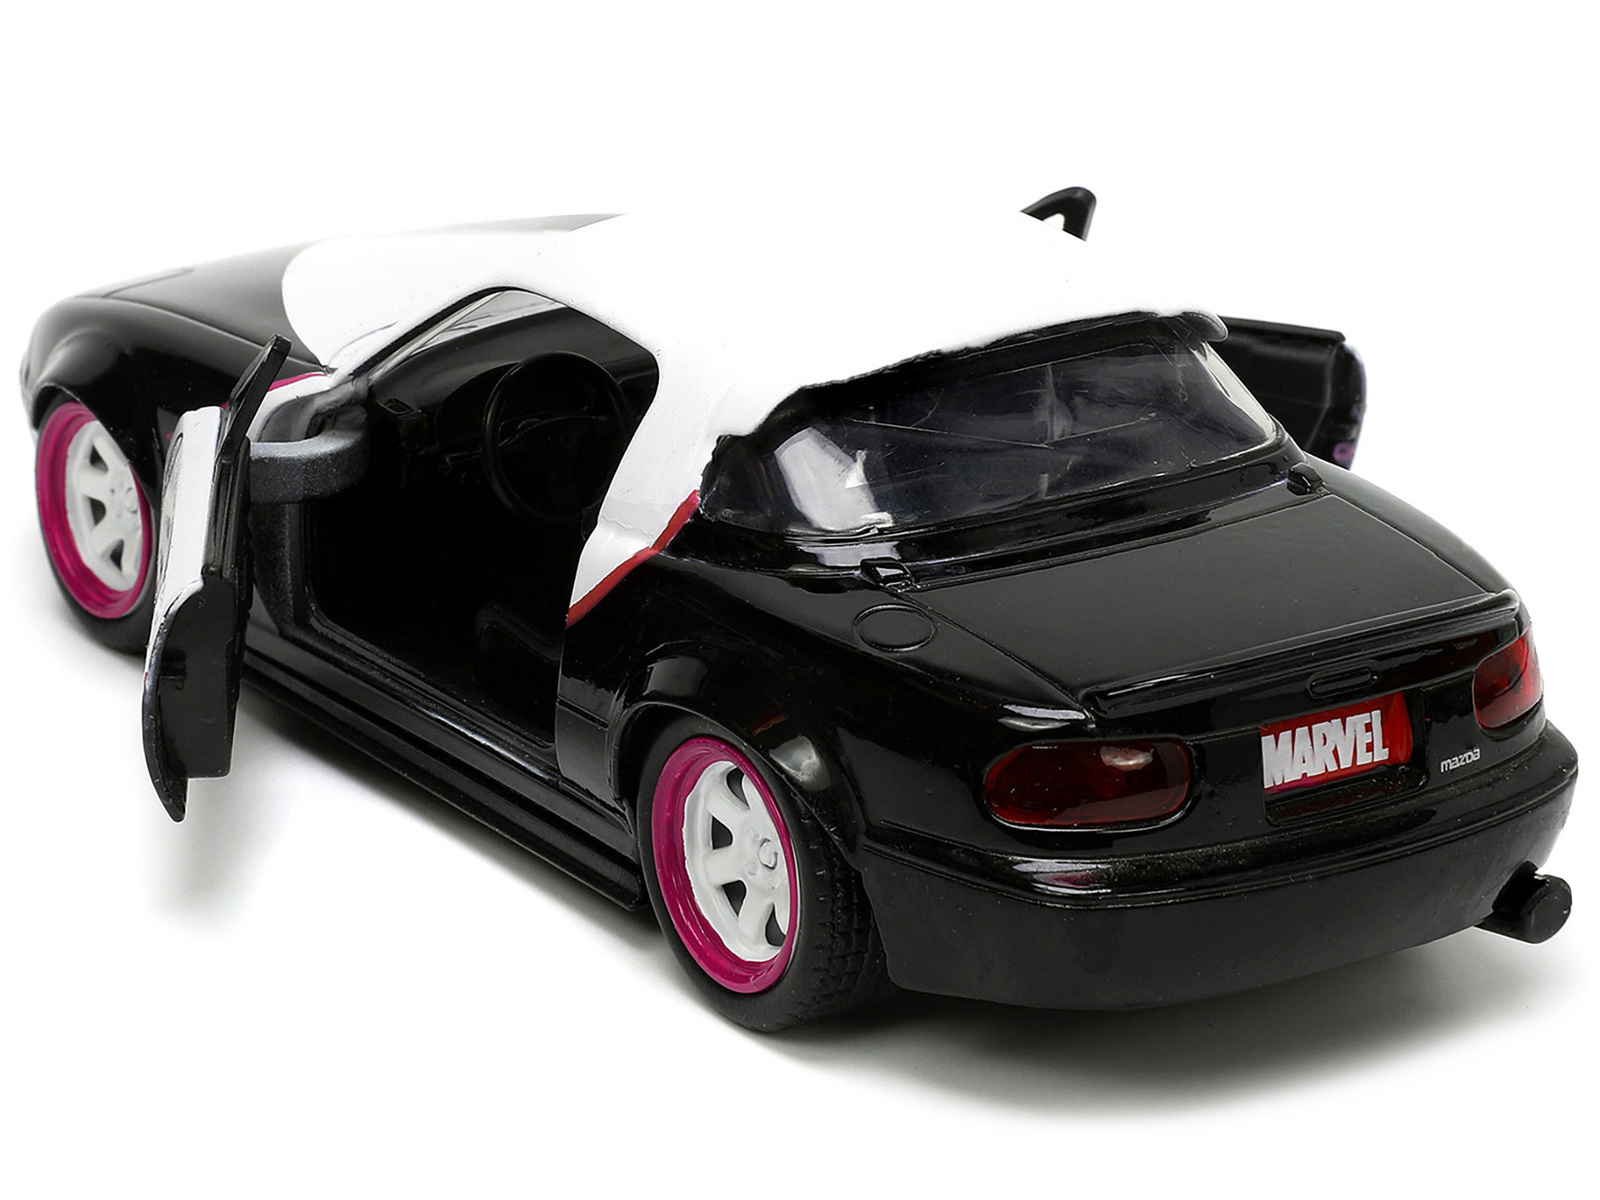 1990 Mazda Miata Black and White with Graphics and Ghost Spider Diecast Figure " - $24.34